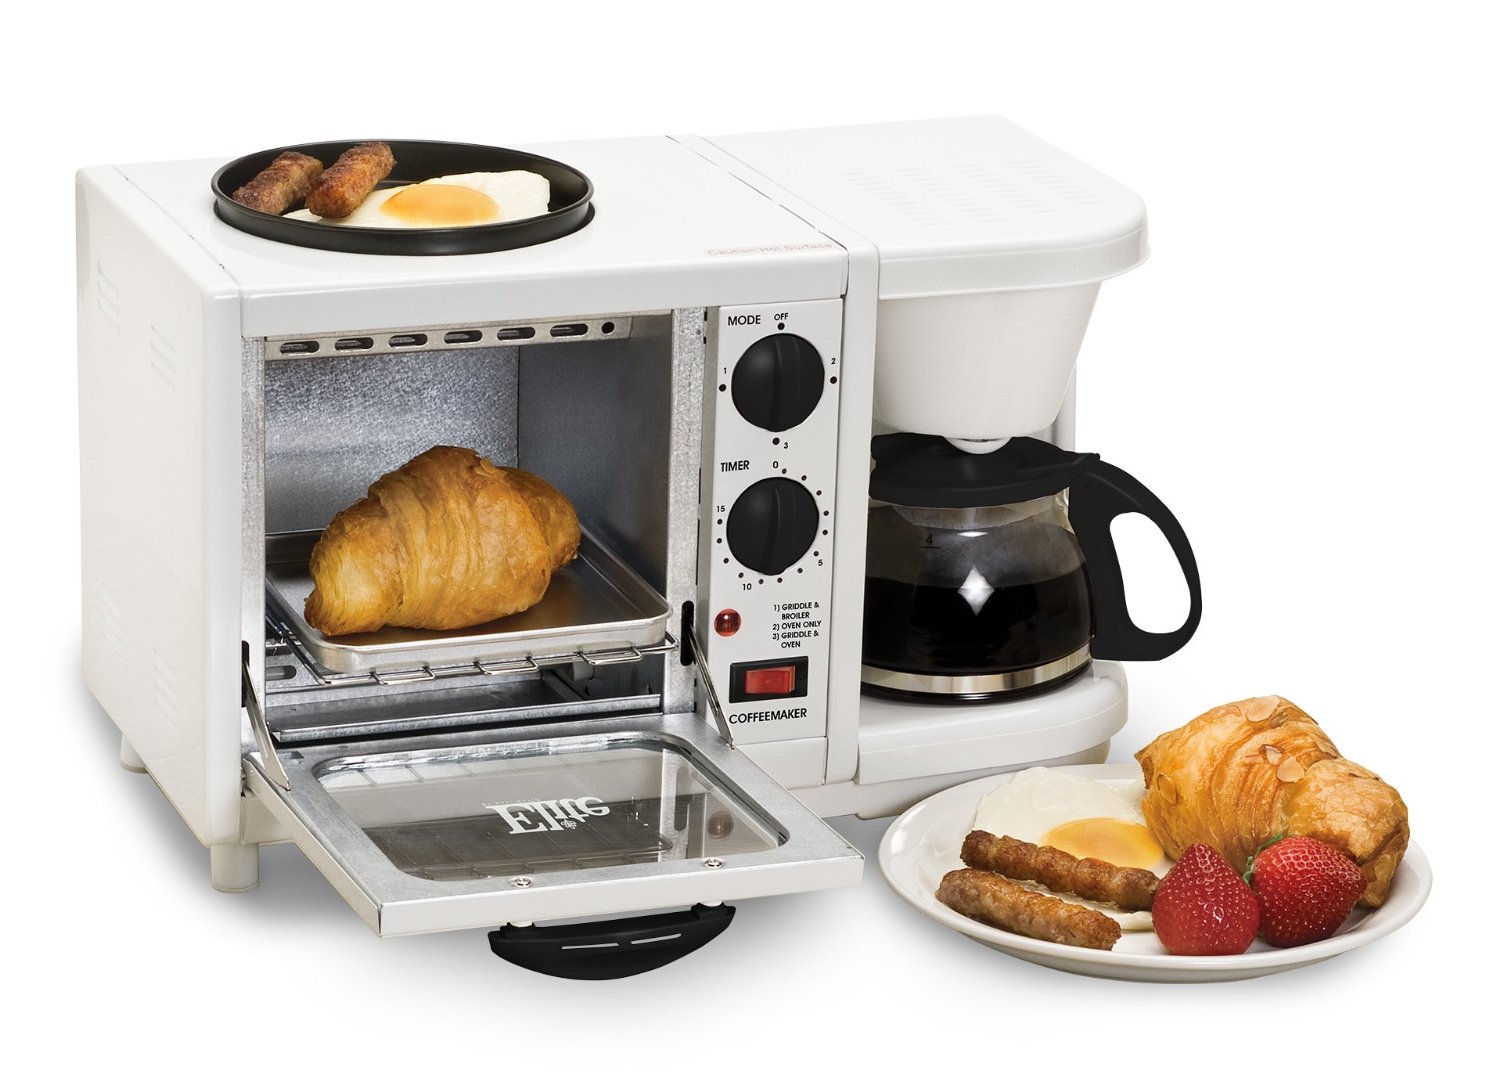 Maxi-Matic 3-in-1 Multifunction Breakfast Center – $37.76! Back to Dorm 101!